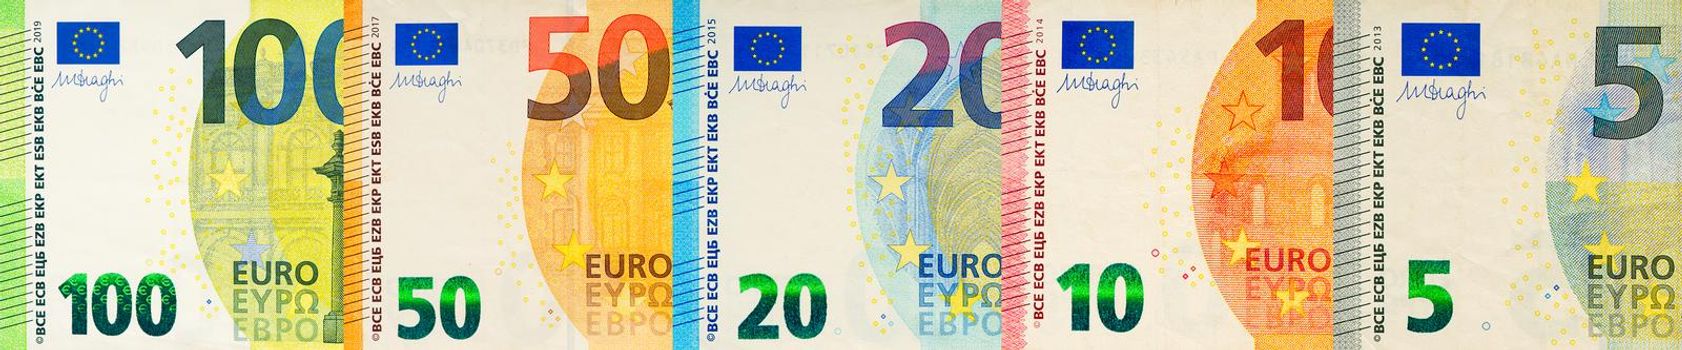 Euro banknotes creative layout. Background from European banknotes, euro